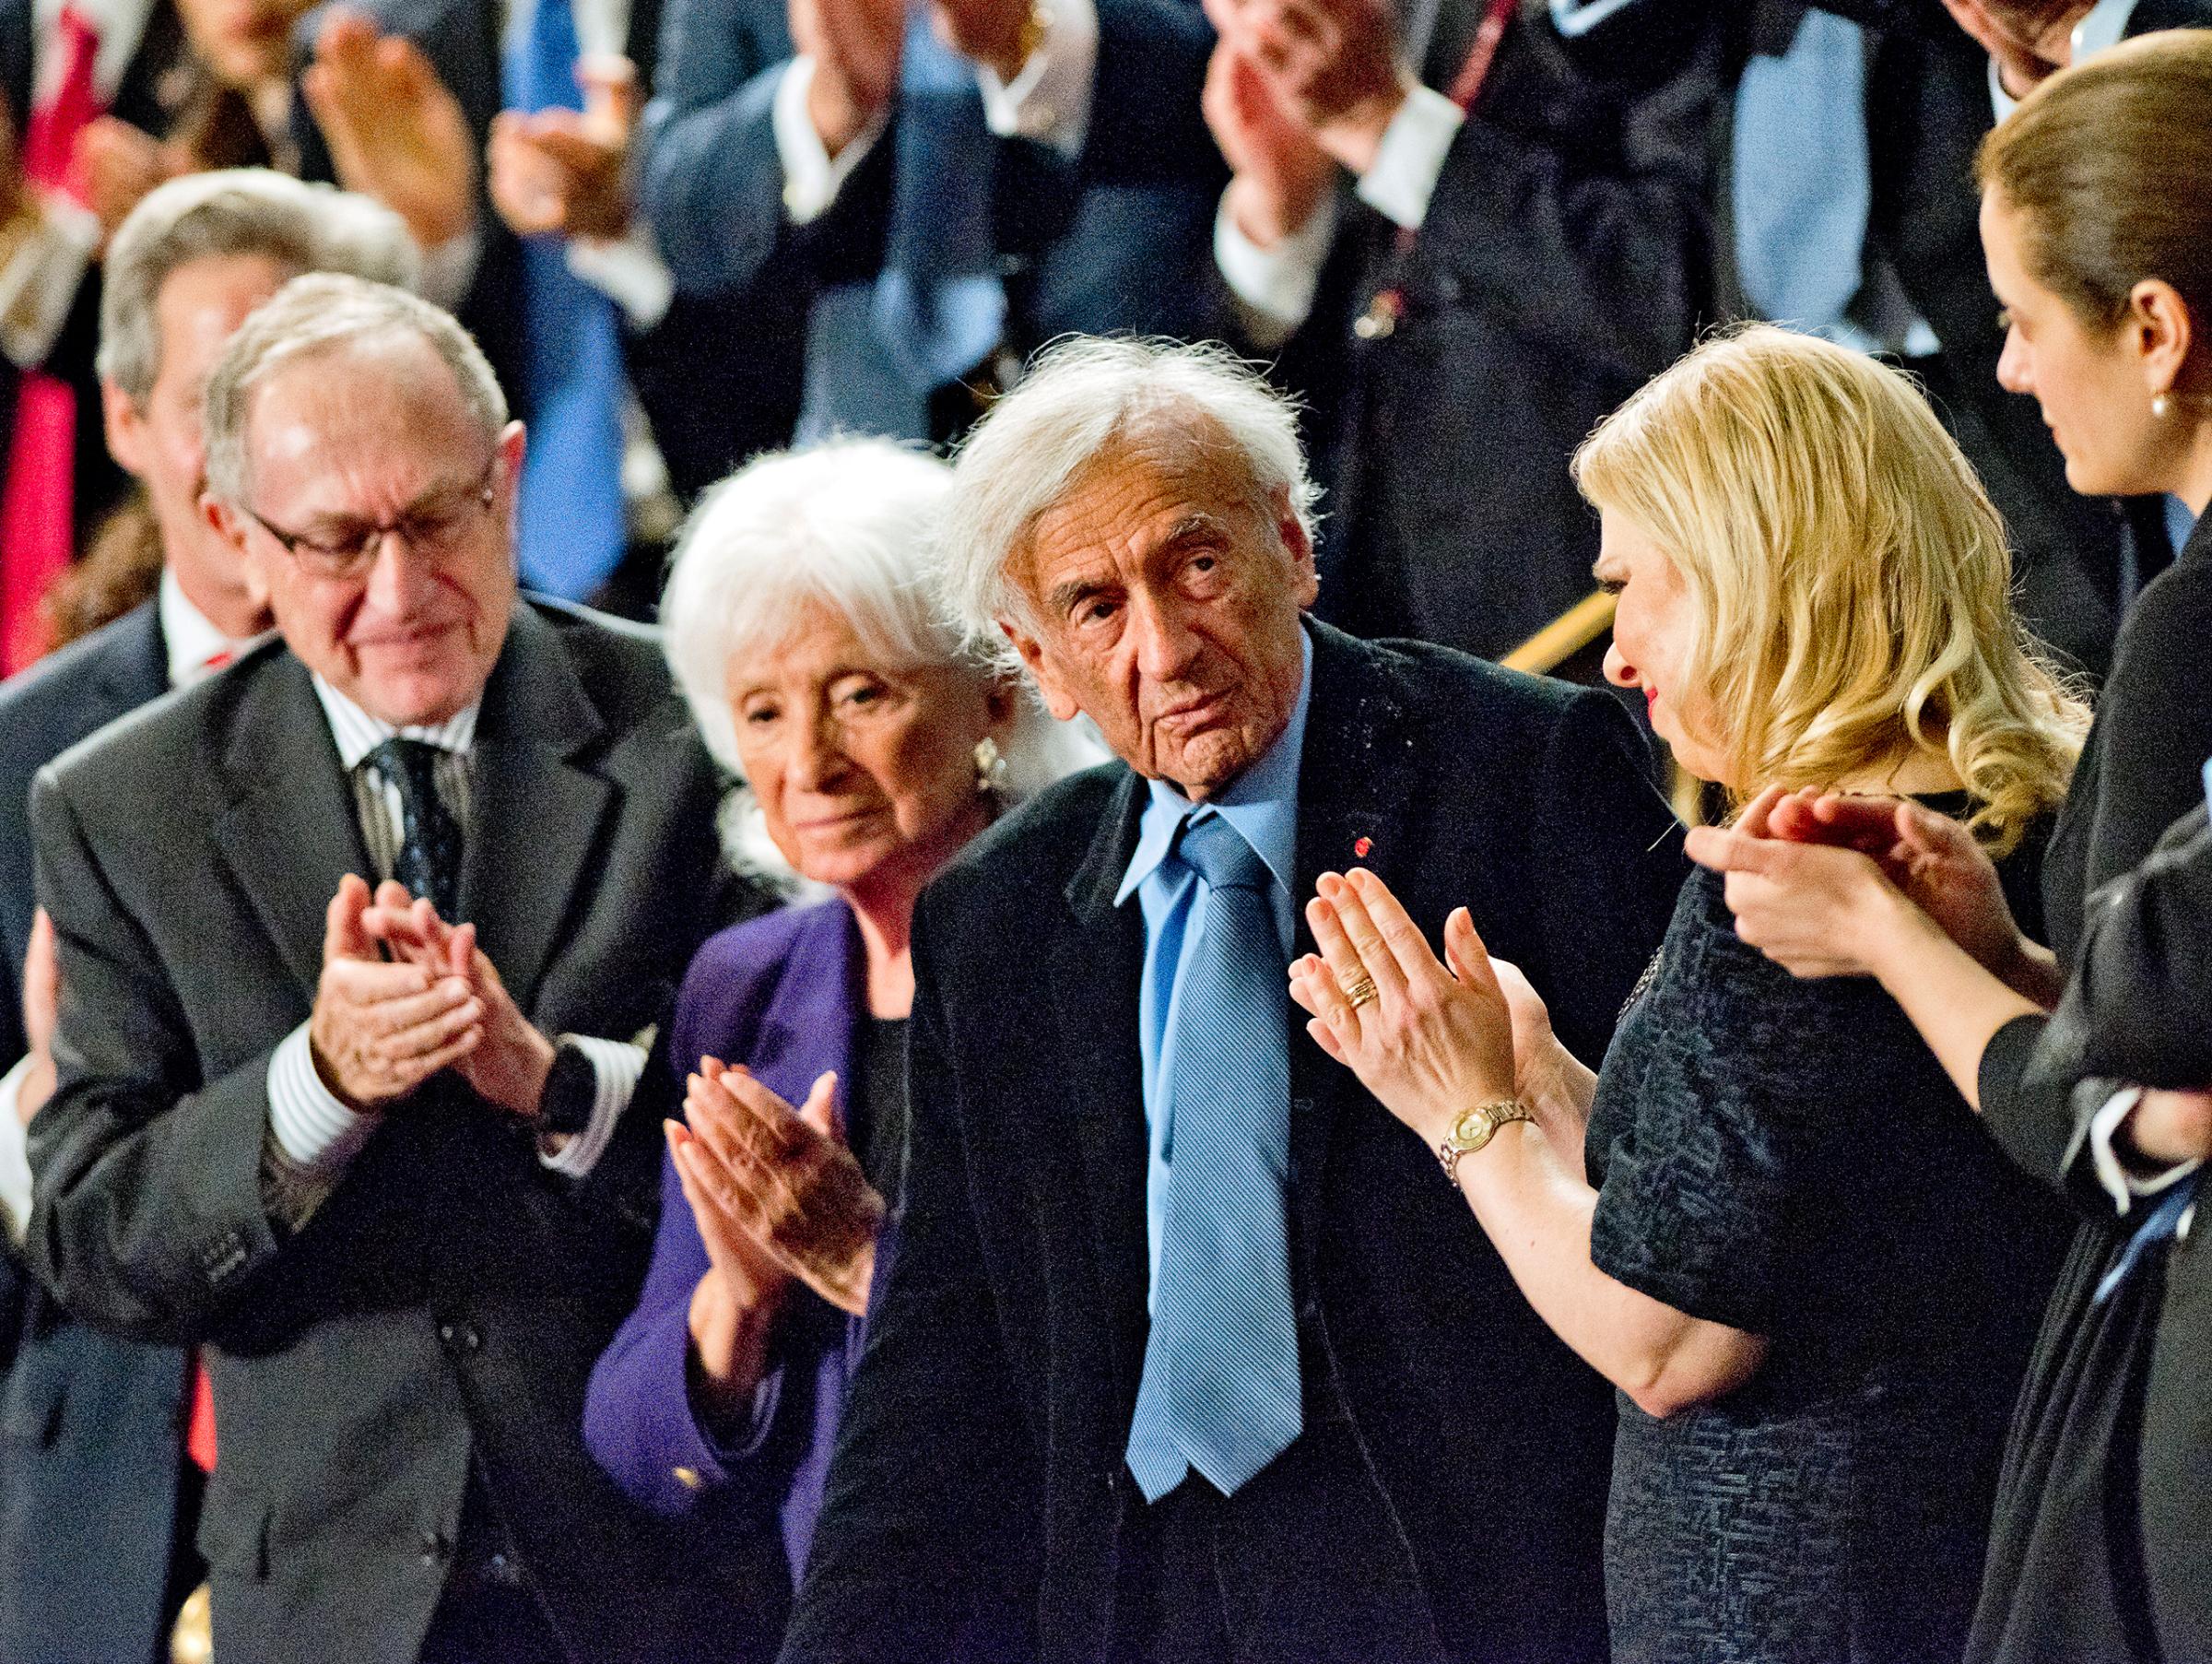 Elie Wiesel stands after he was recognized during the address of Prime Minister Benjamin Netanyahu of Israel to a joint session of the United States Congress in the U.S. Capitol in Washington, D.C. on March 3, 2015.